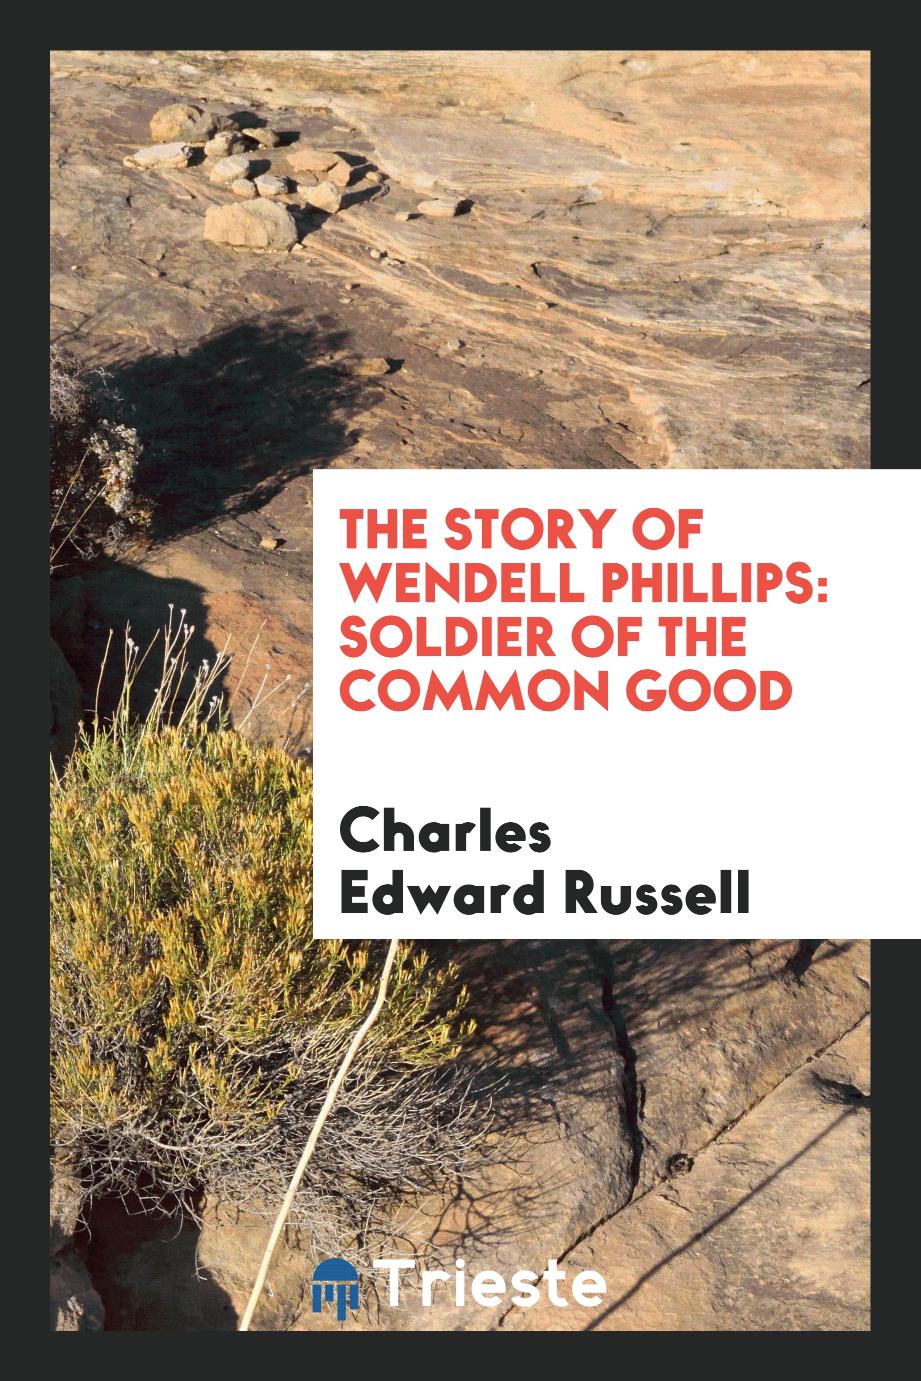 The Story of Wendell Phillips: Soldier of the Common Good